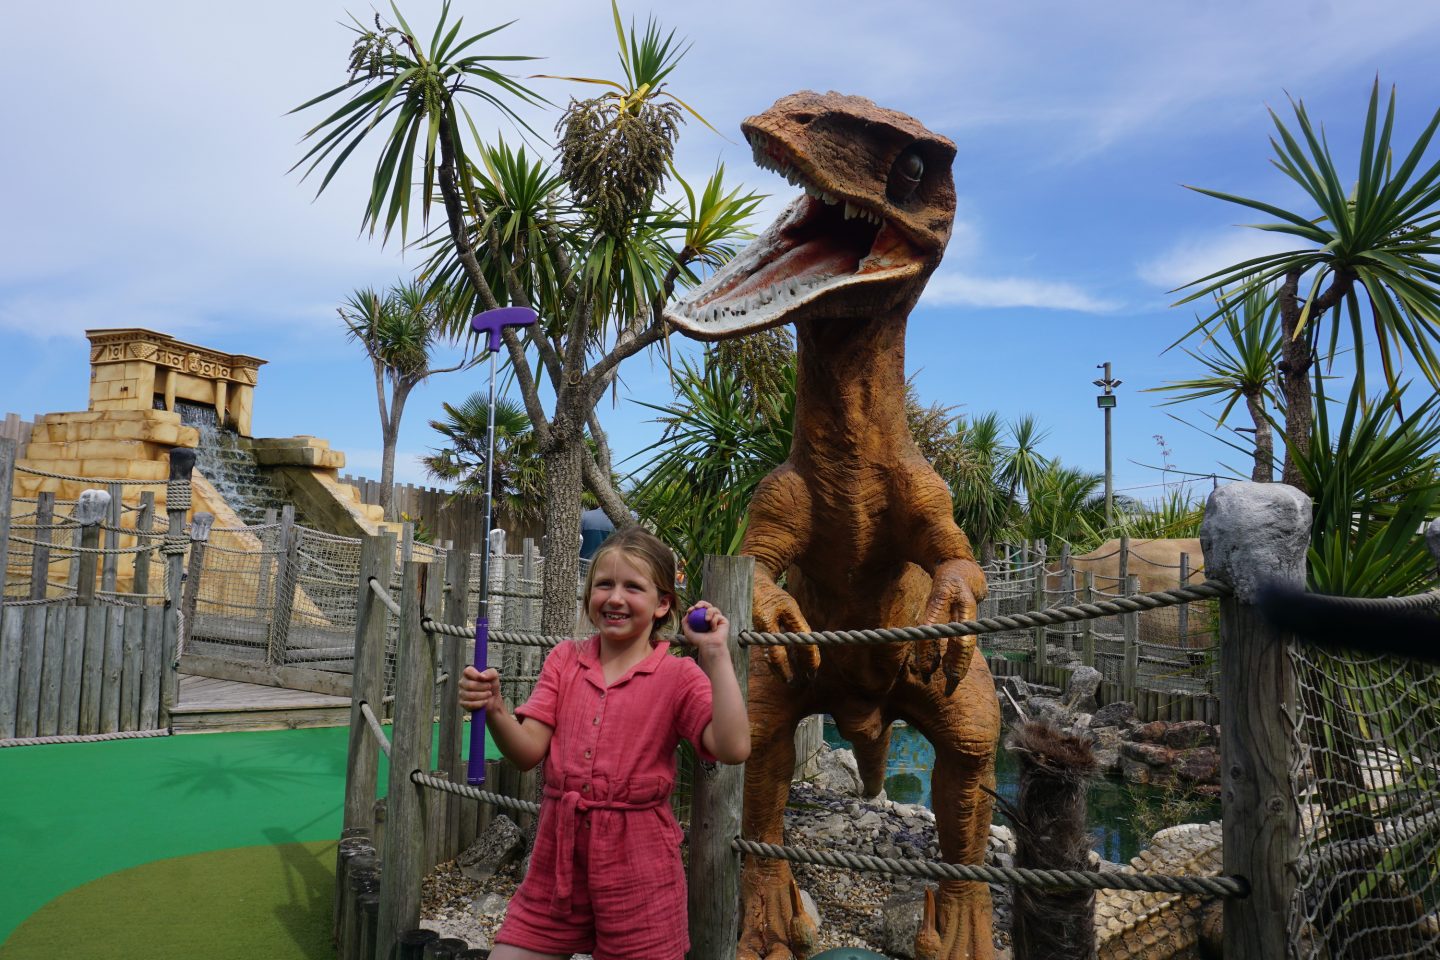 Large dinosaur model at Lost World Adventure Golf Great Yarmouth towers over little girl holding a golf club and golf ball with palm trees in the background